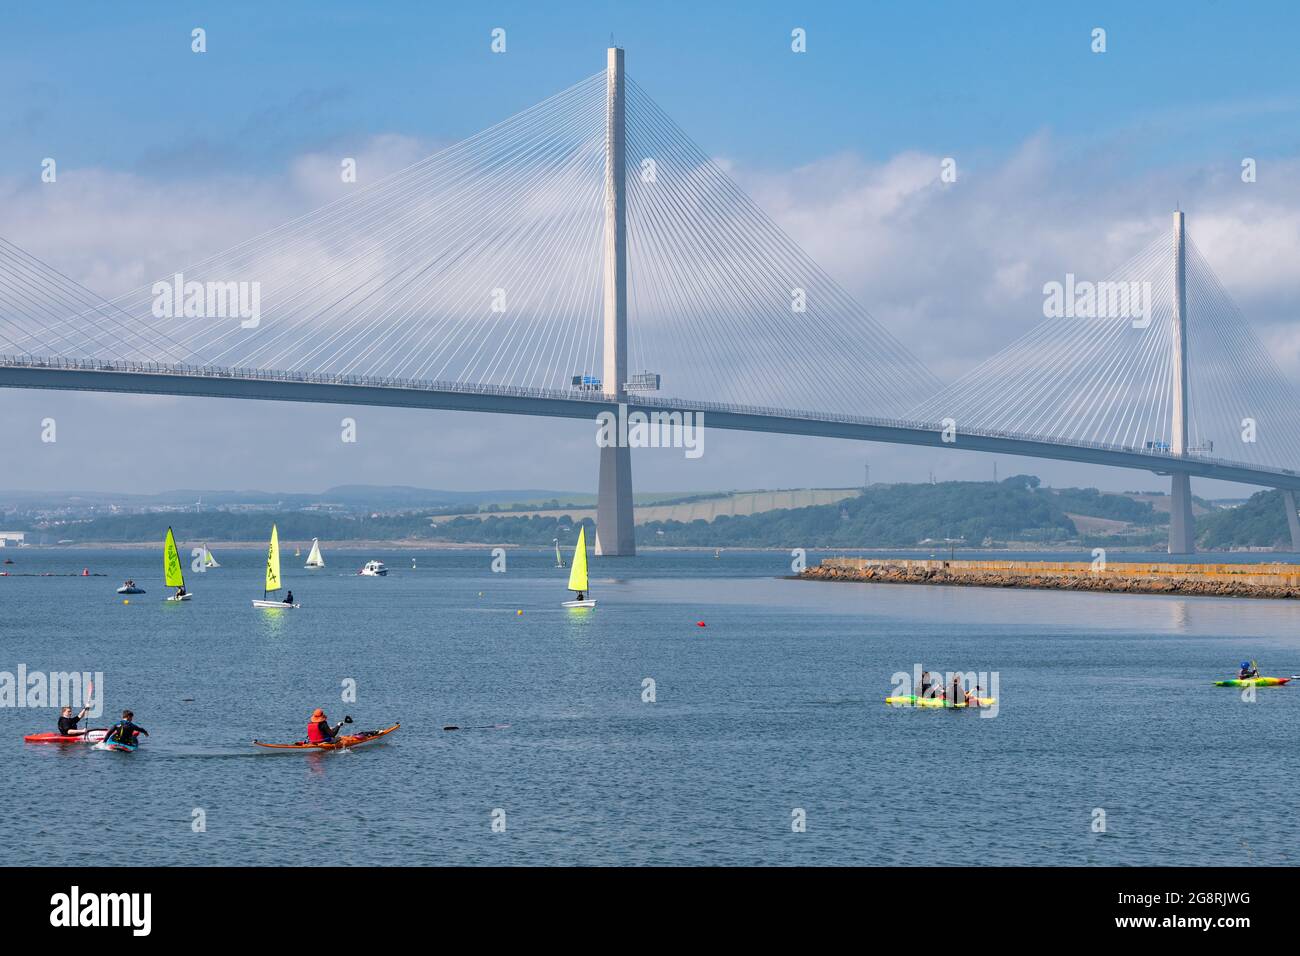 Port Edgar Marina et Watersports Center, Firth of Forth, South Queensferry, Écosse, Royaume-Uni avec la toile de fond du pont Queensferry Crossing Banque D'Images